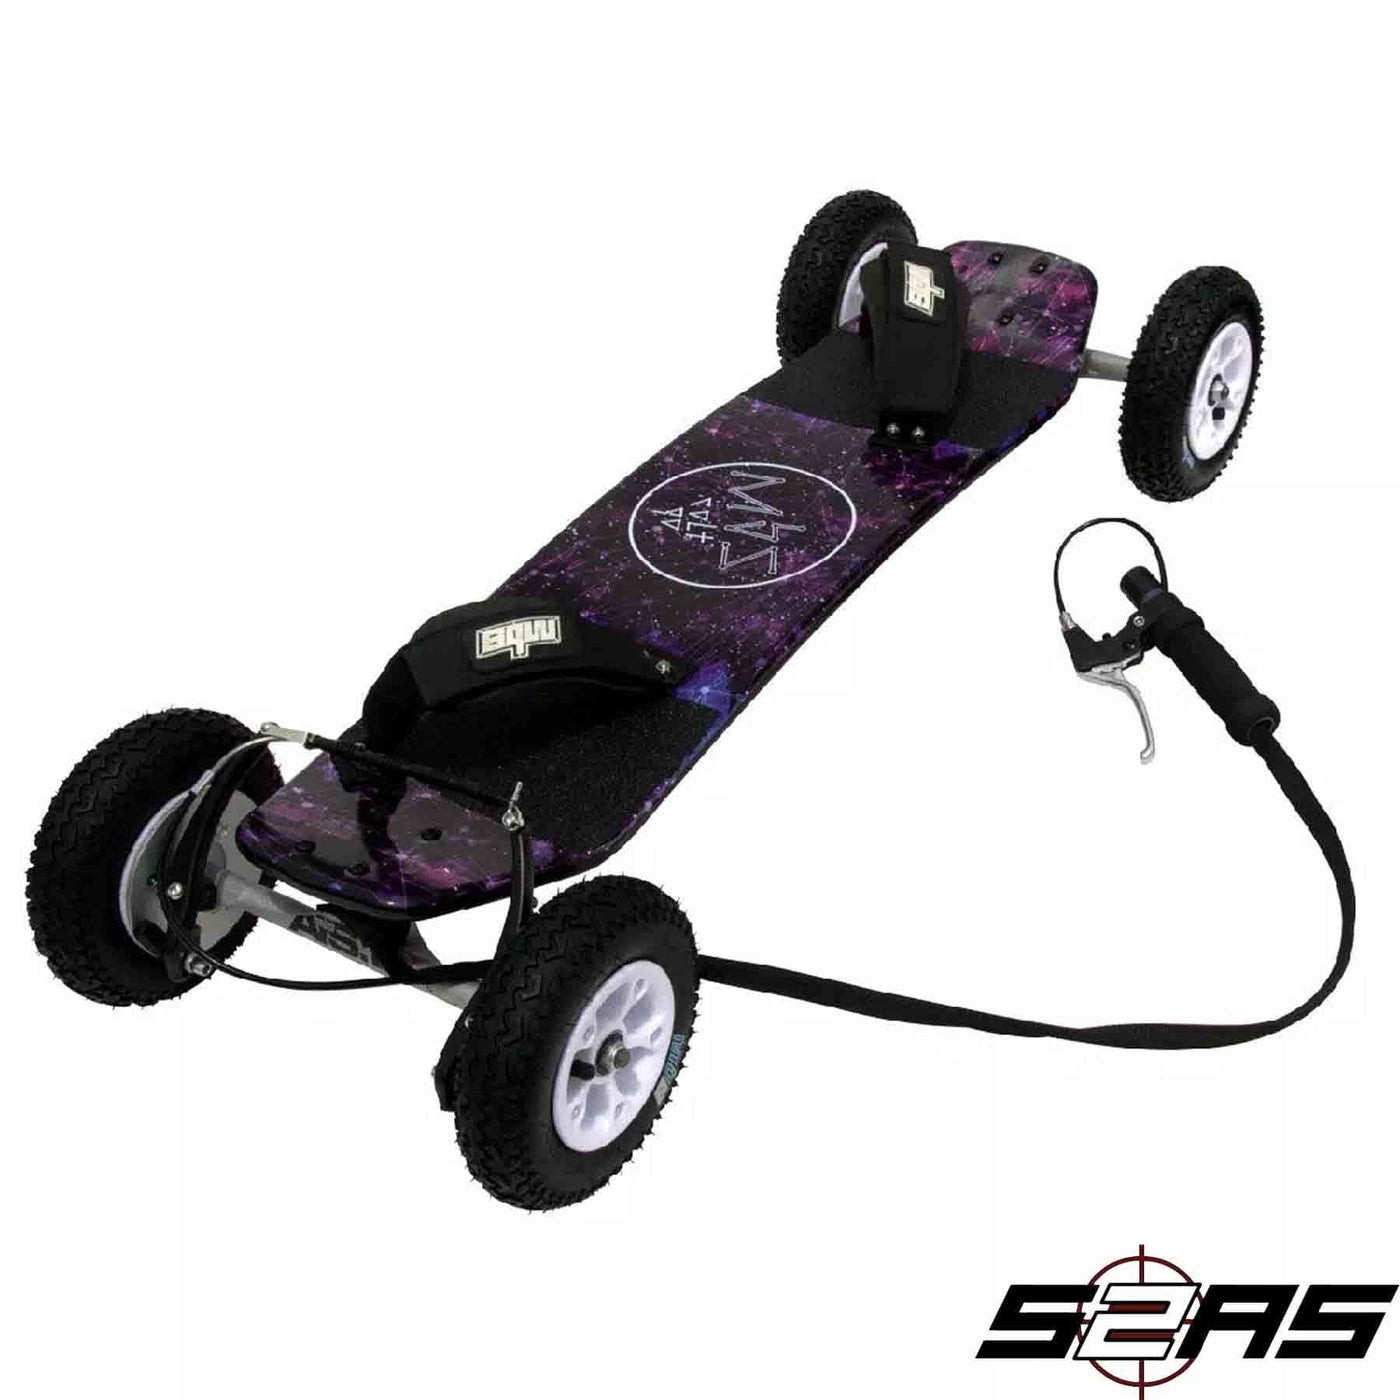 MBS Colt 90x Mountainboard - Constellation MBS